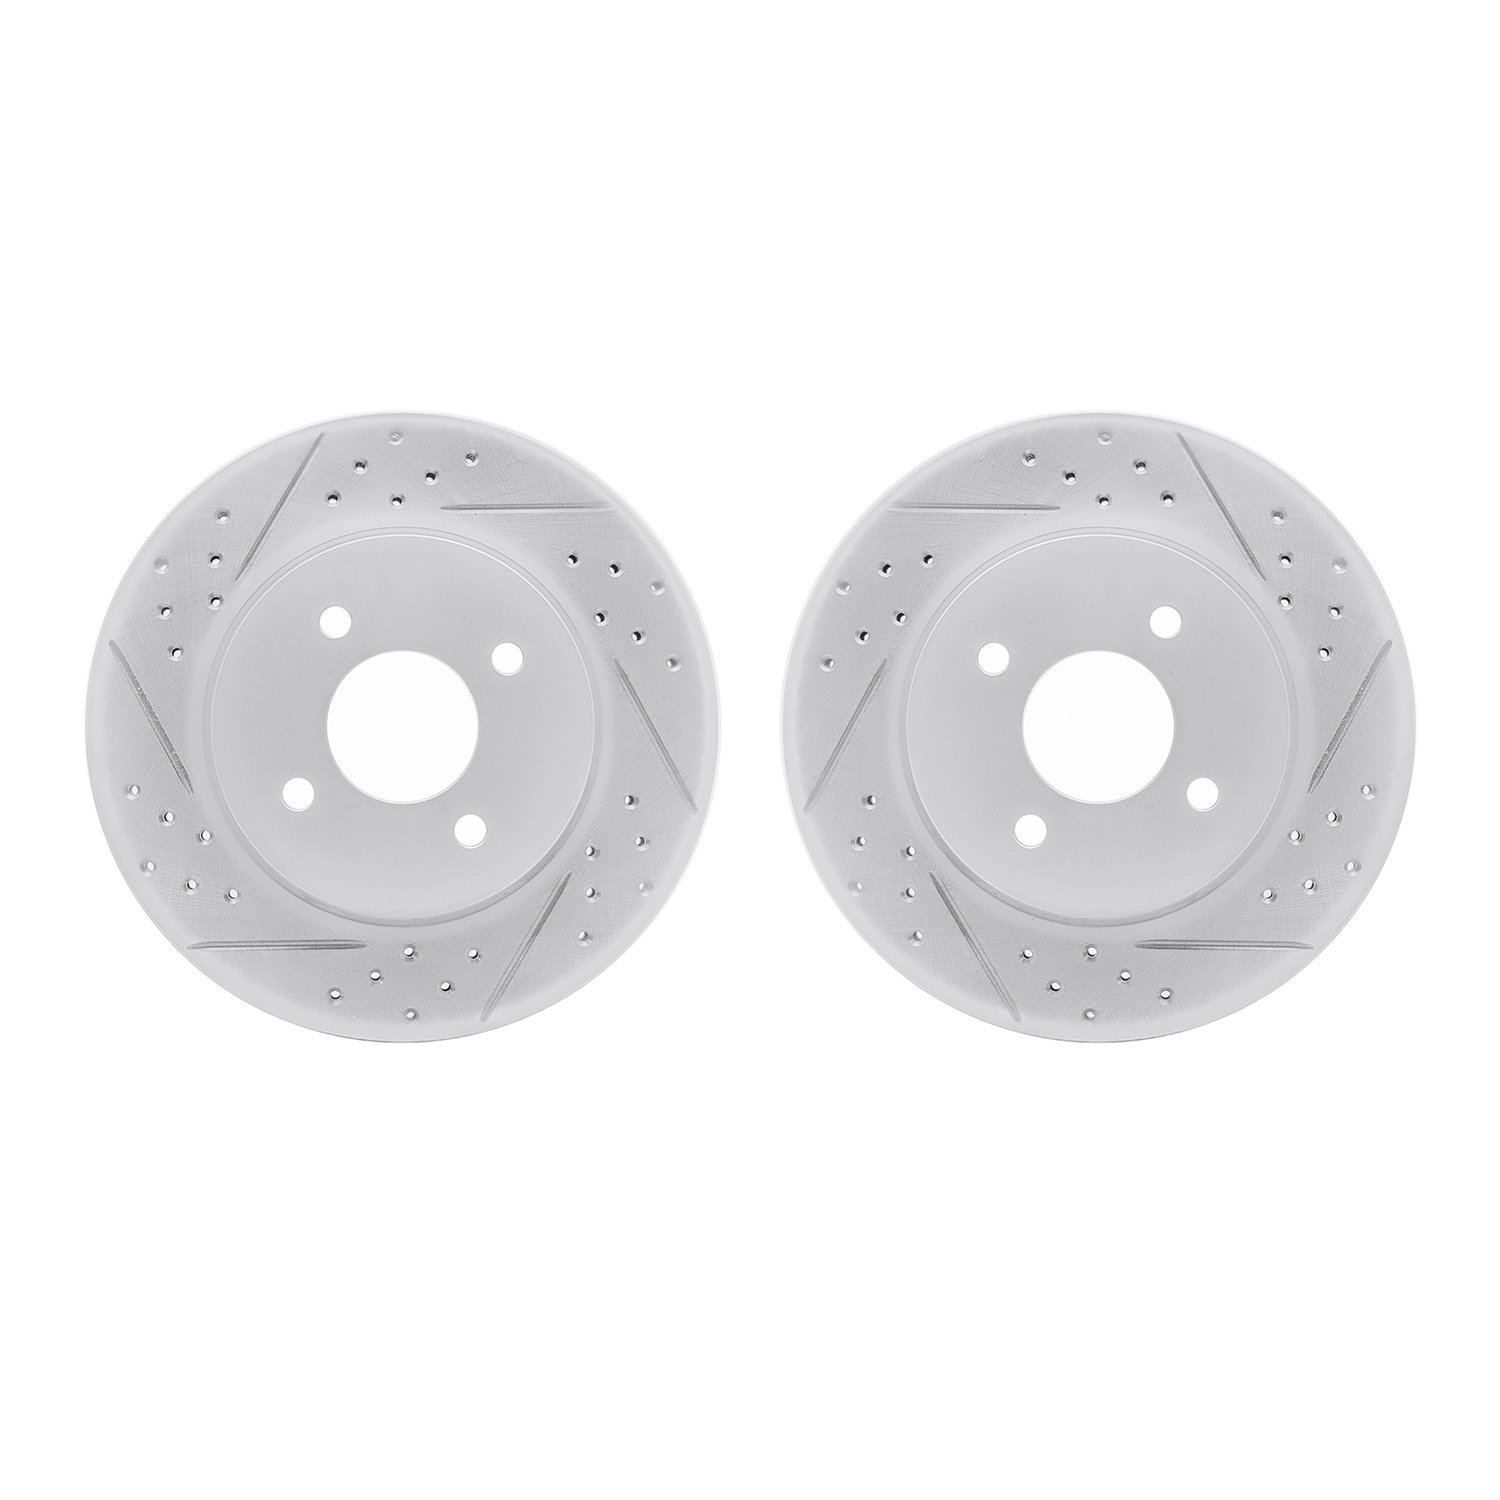 2002-67032 Geoperformance Drilled/Slotted Brake Rotors, 2012-2019 Infiniti/Nissan, Position: Front